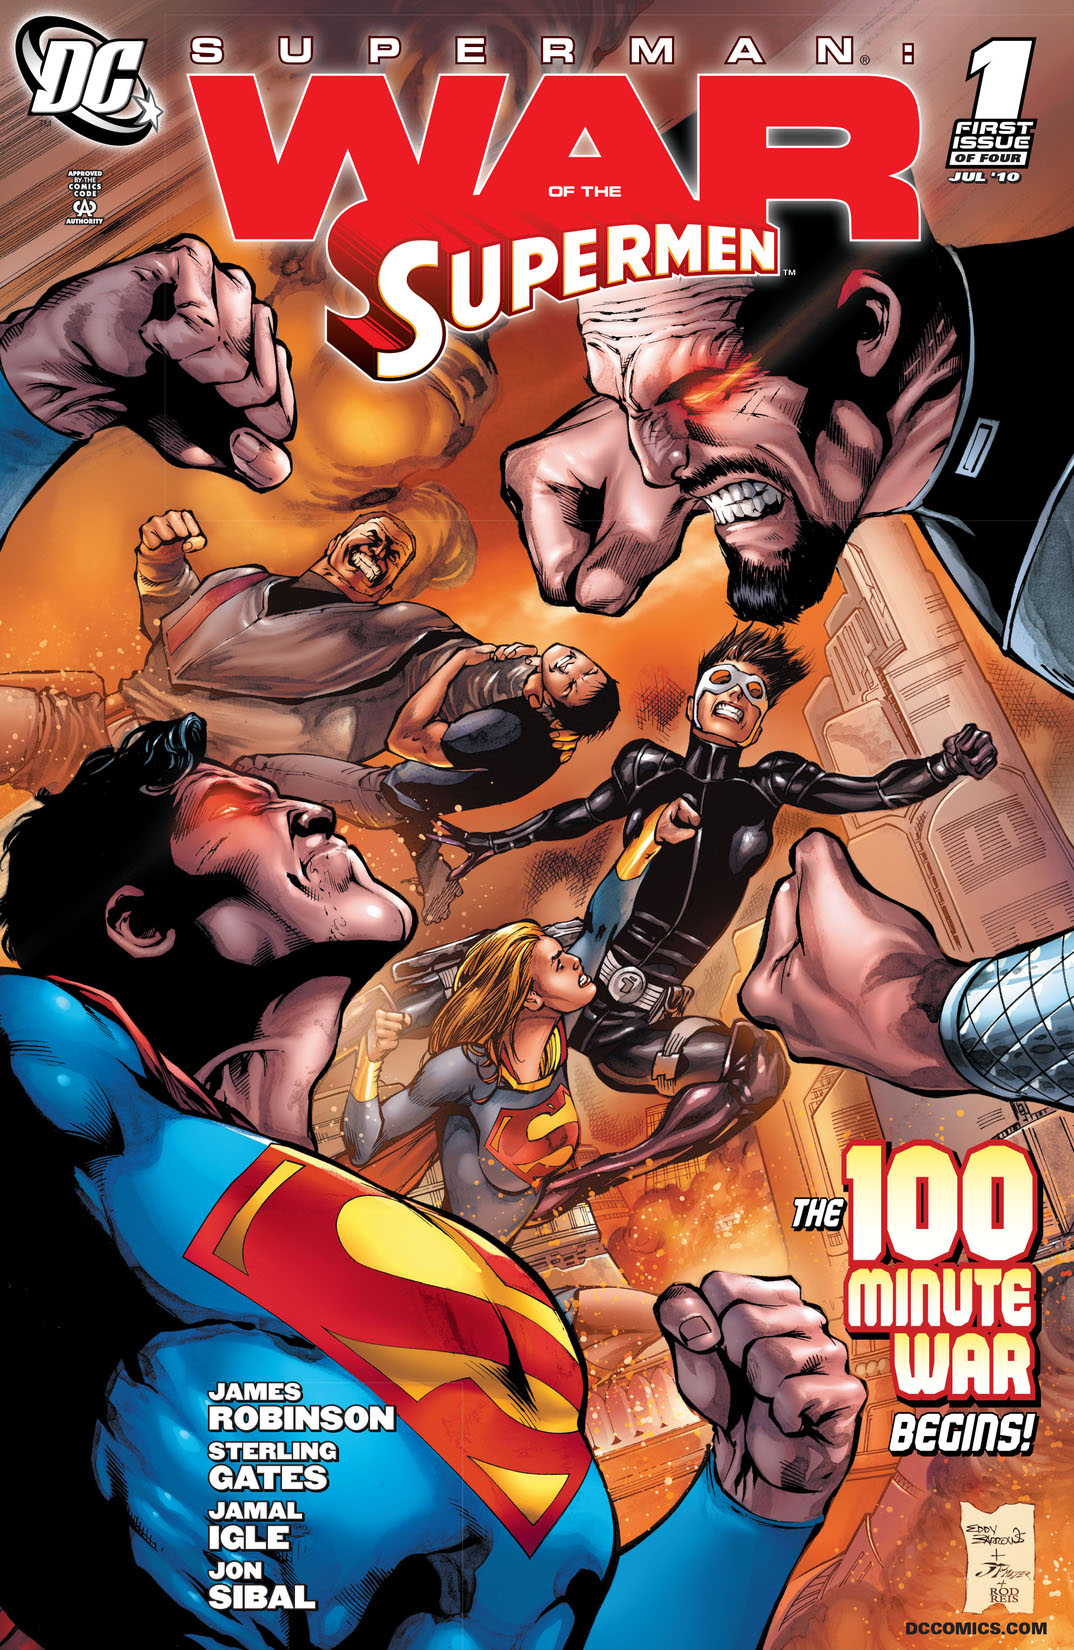 Superman: War of the Supermen #1 preview images